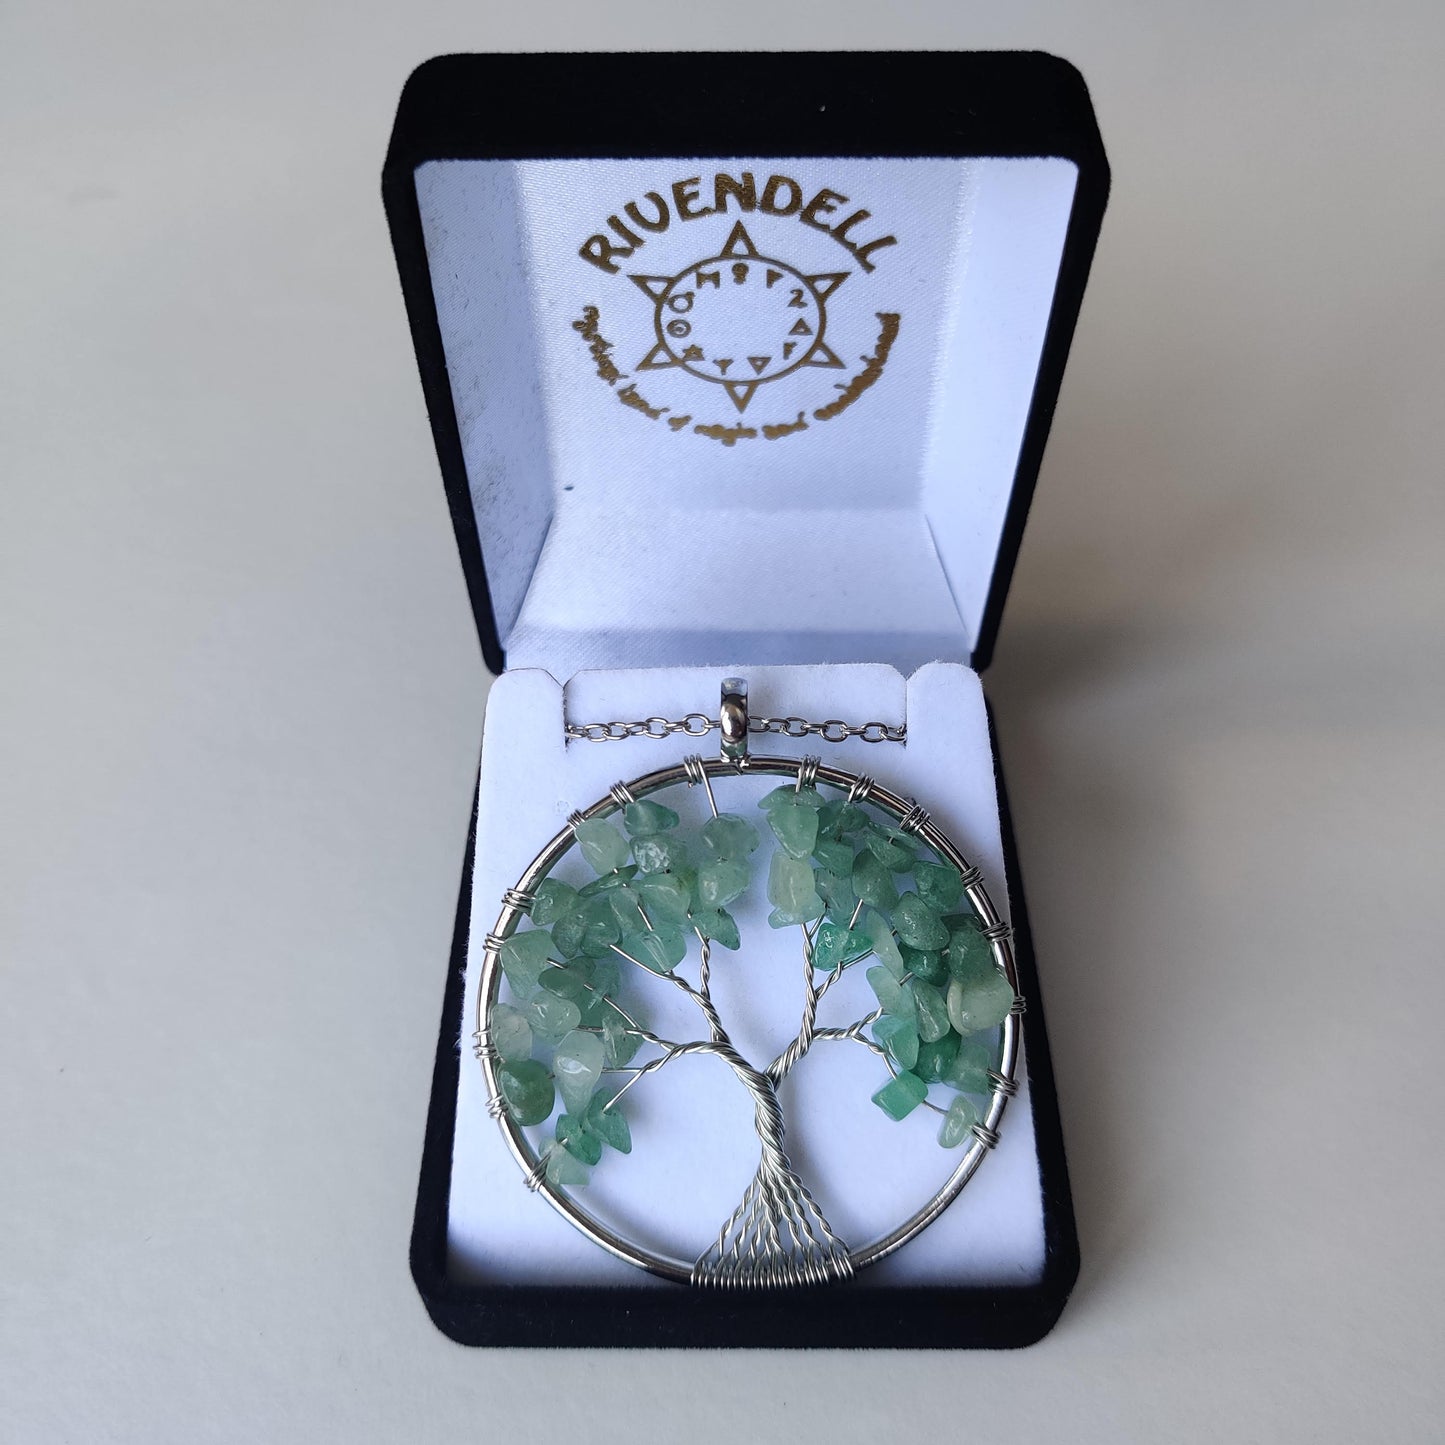 Green Aventurine Tree of Life Pendant with Silver Chain - Rivendell Shop